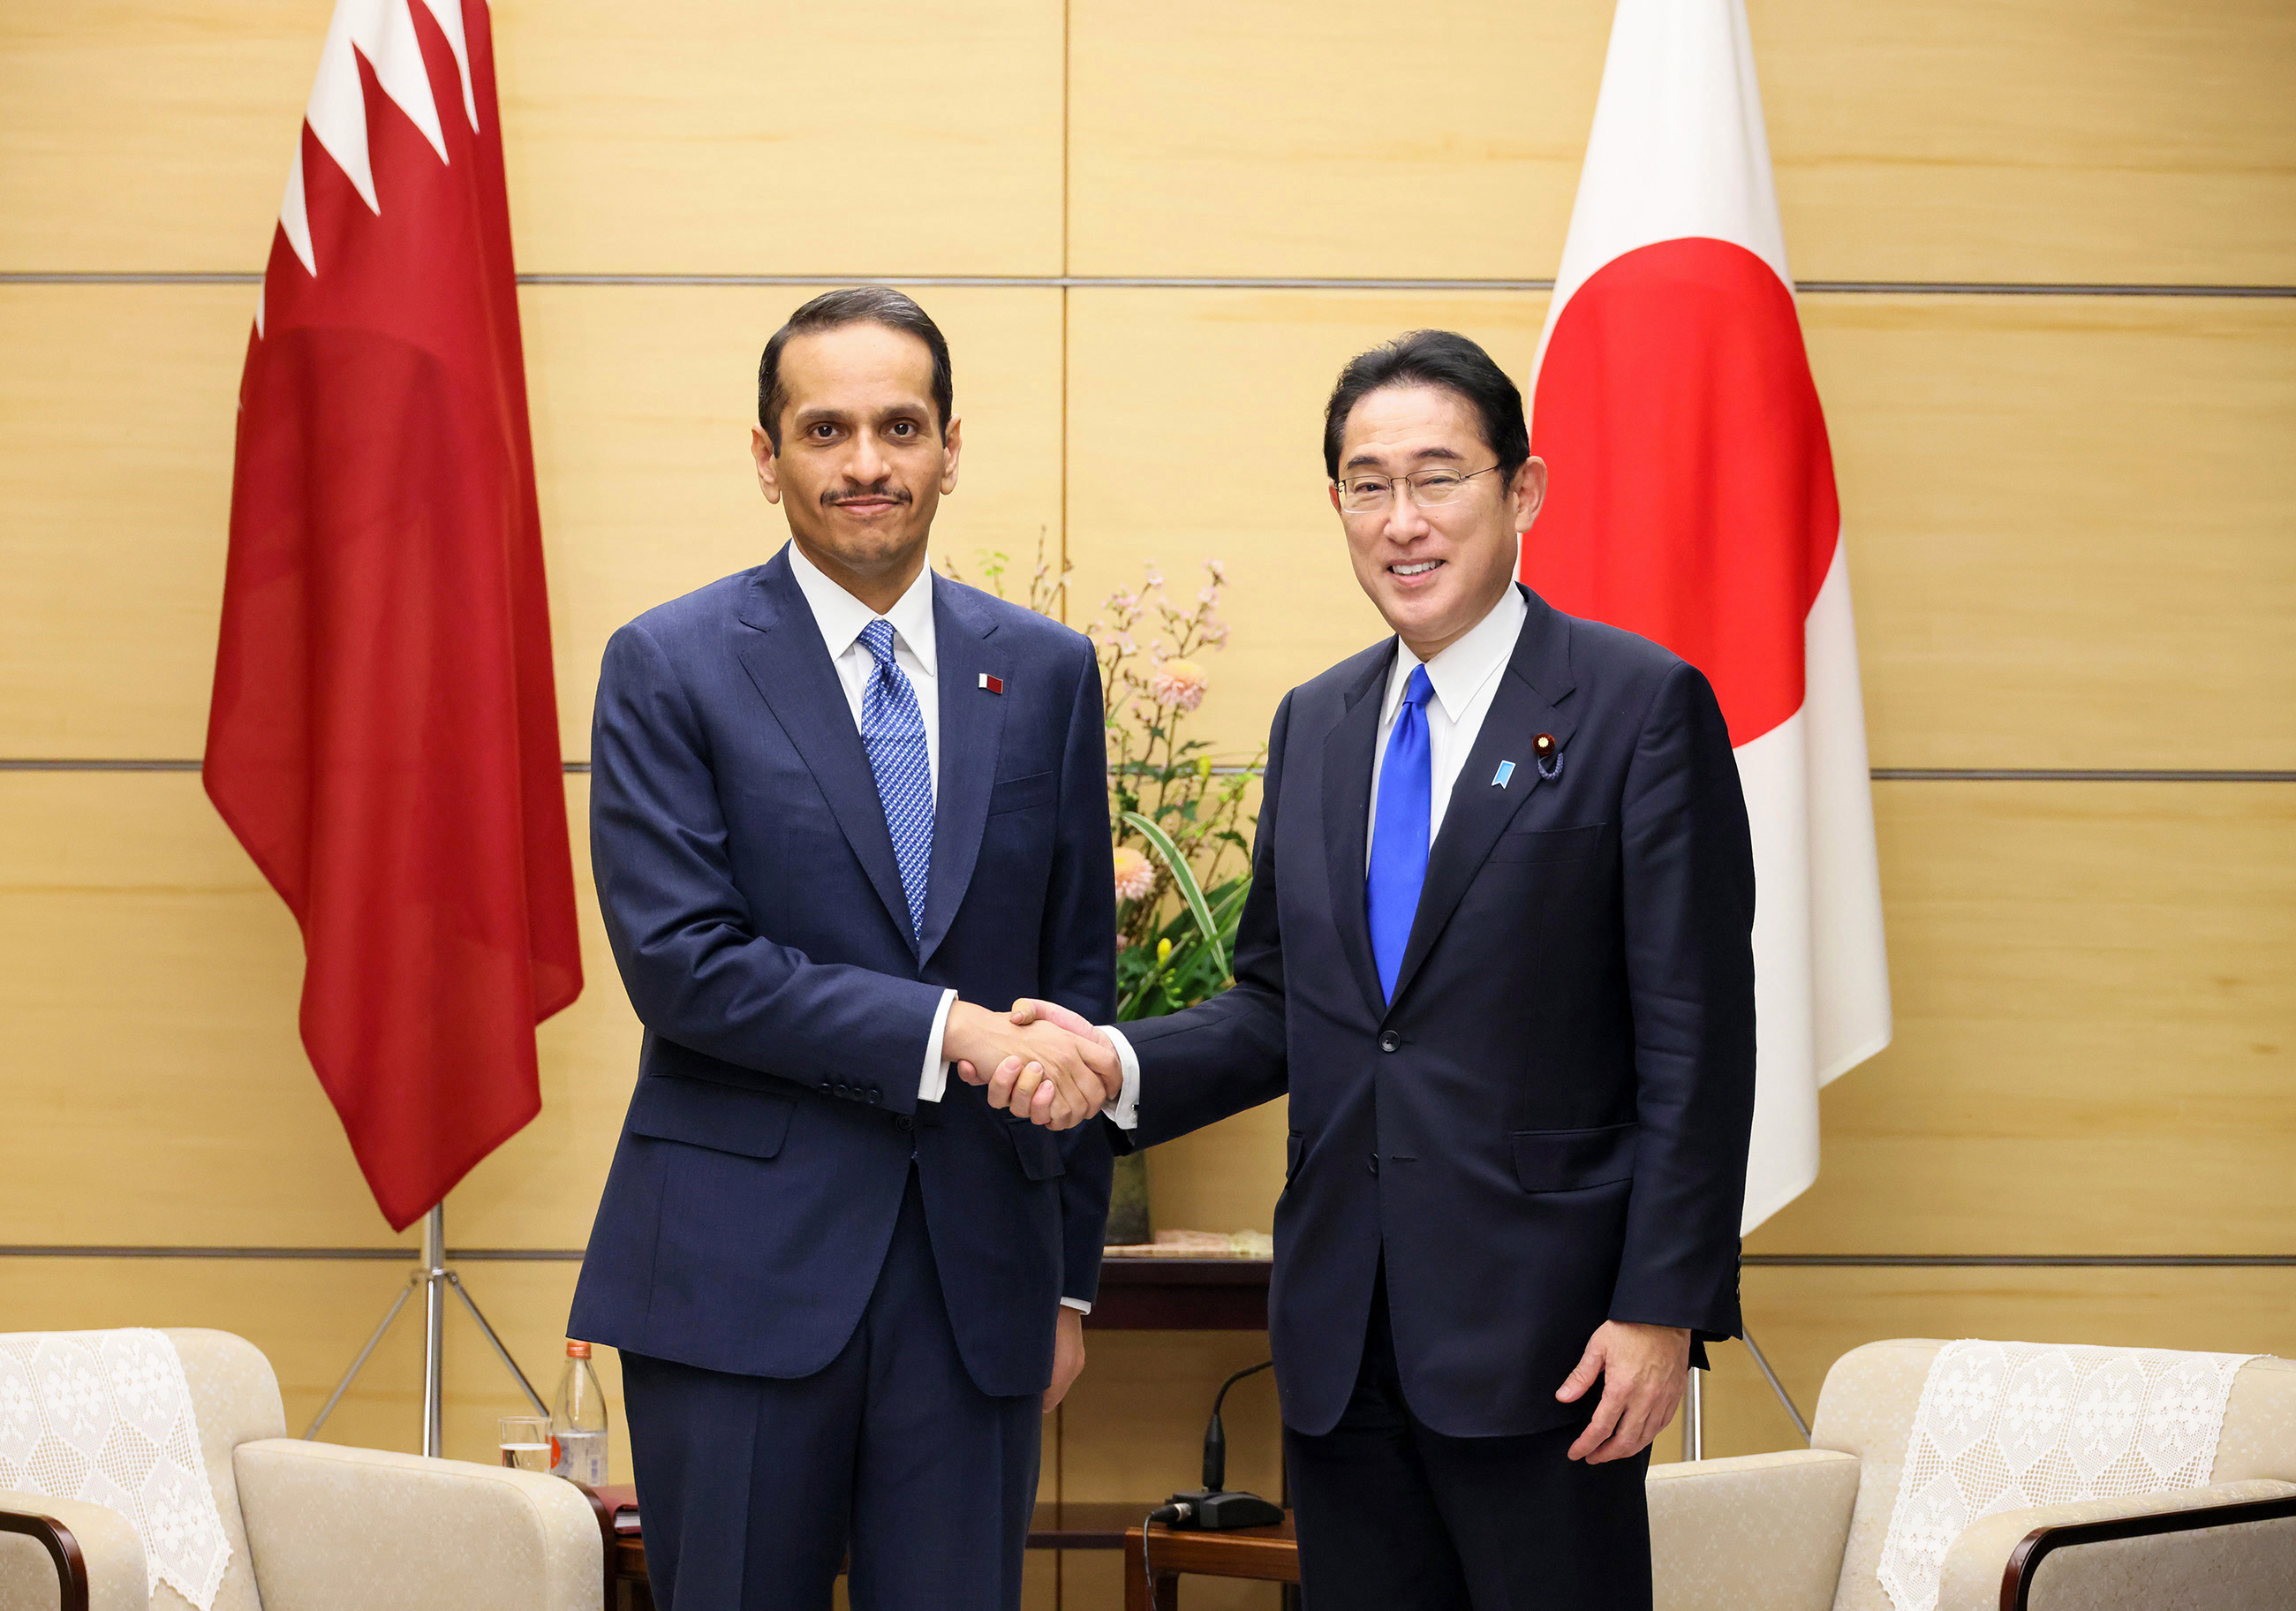 Courtesy Call from Deputy Prime Minister and Minister of Foreign Affairs of Qatar Sheikh Mohammed bin Abdulrahman Al-Thani